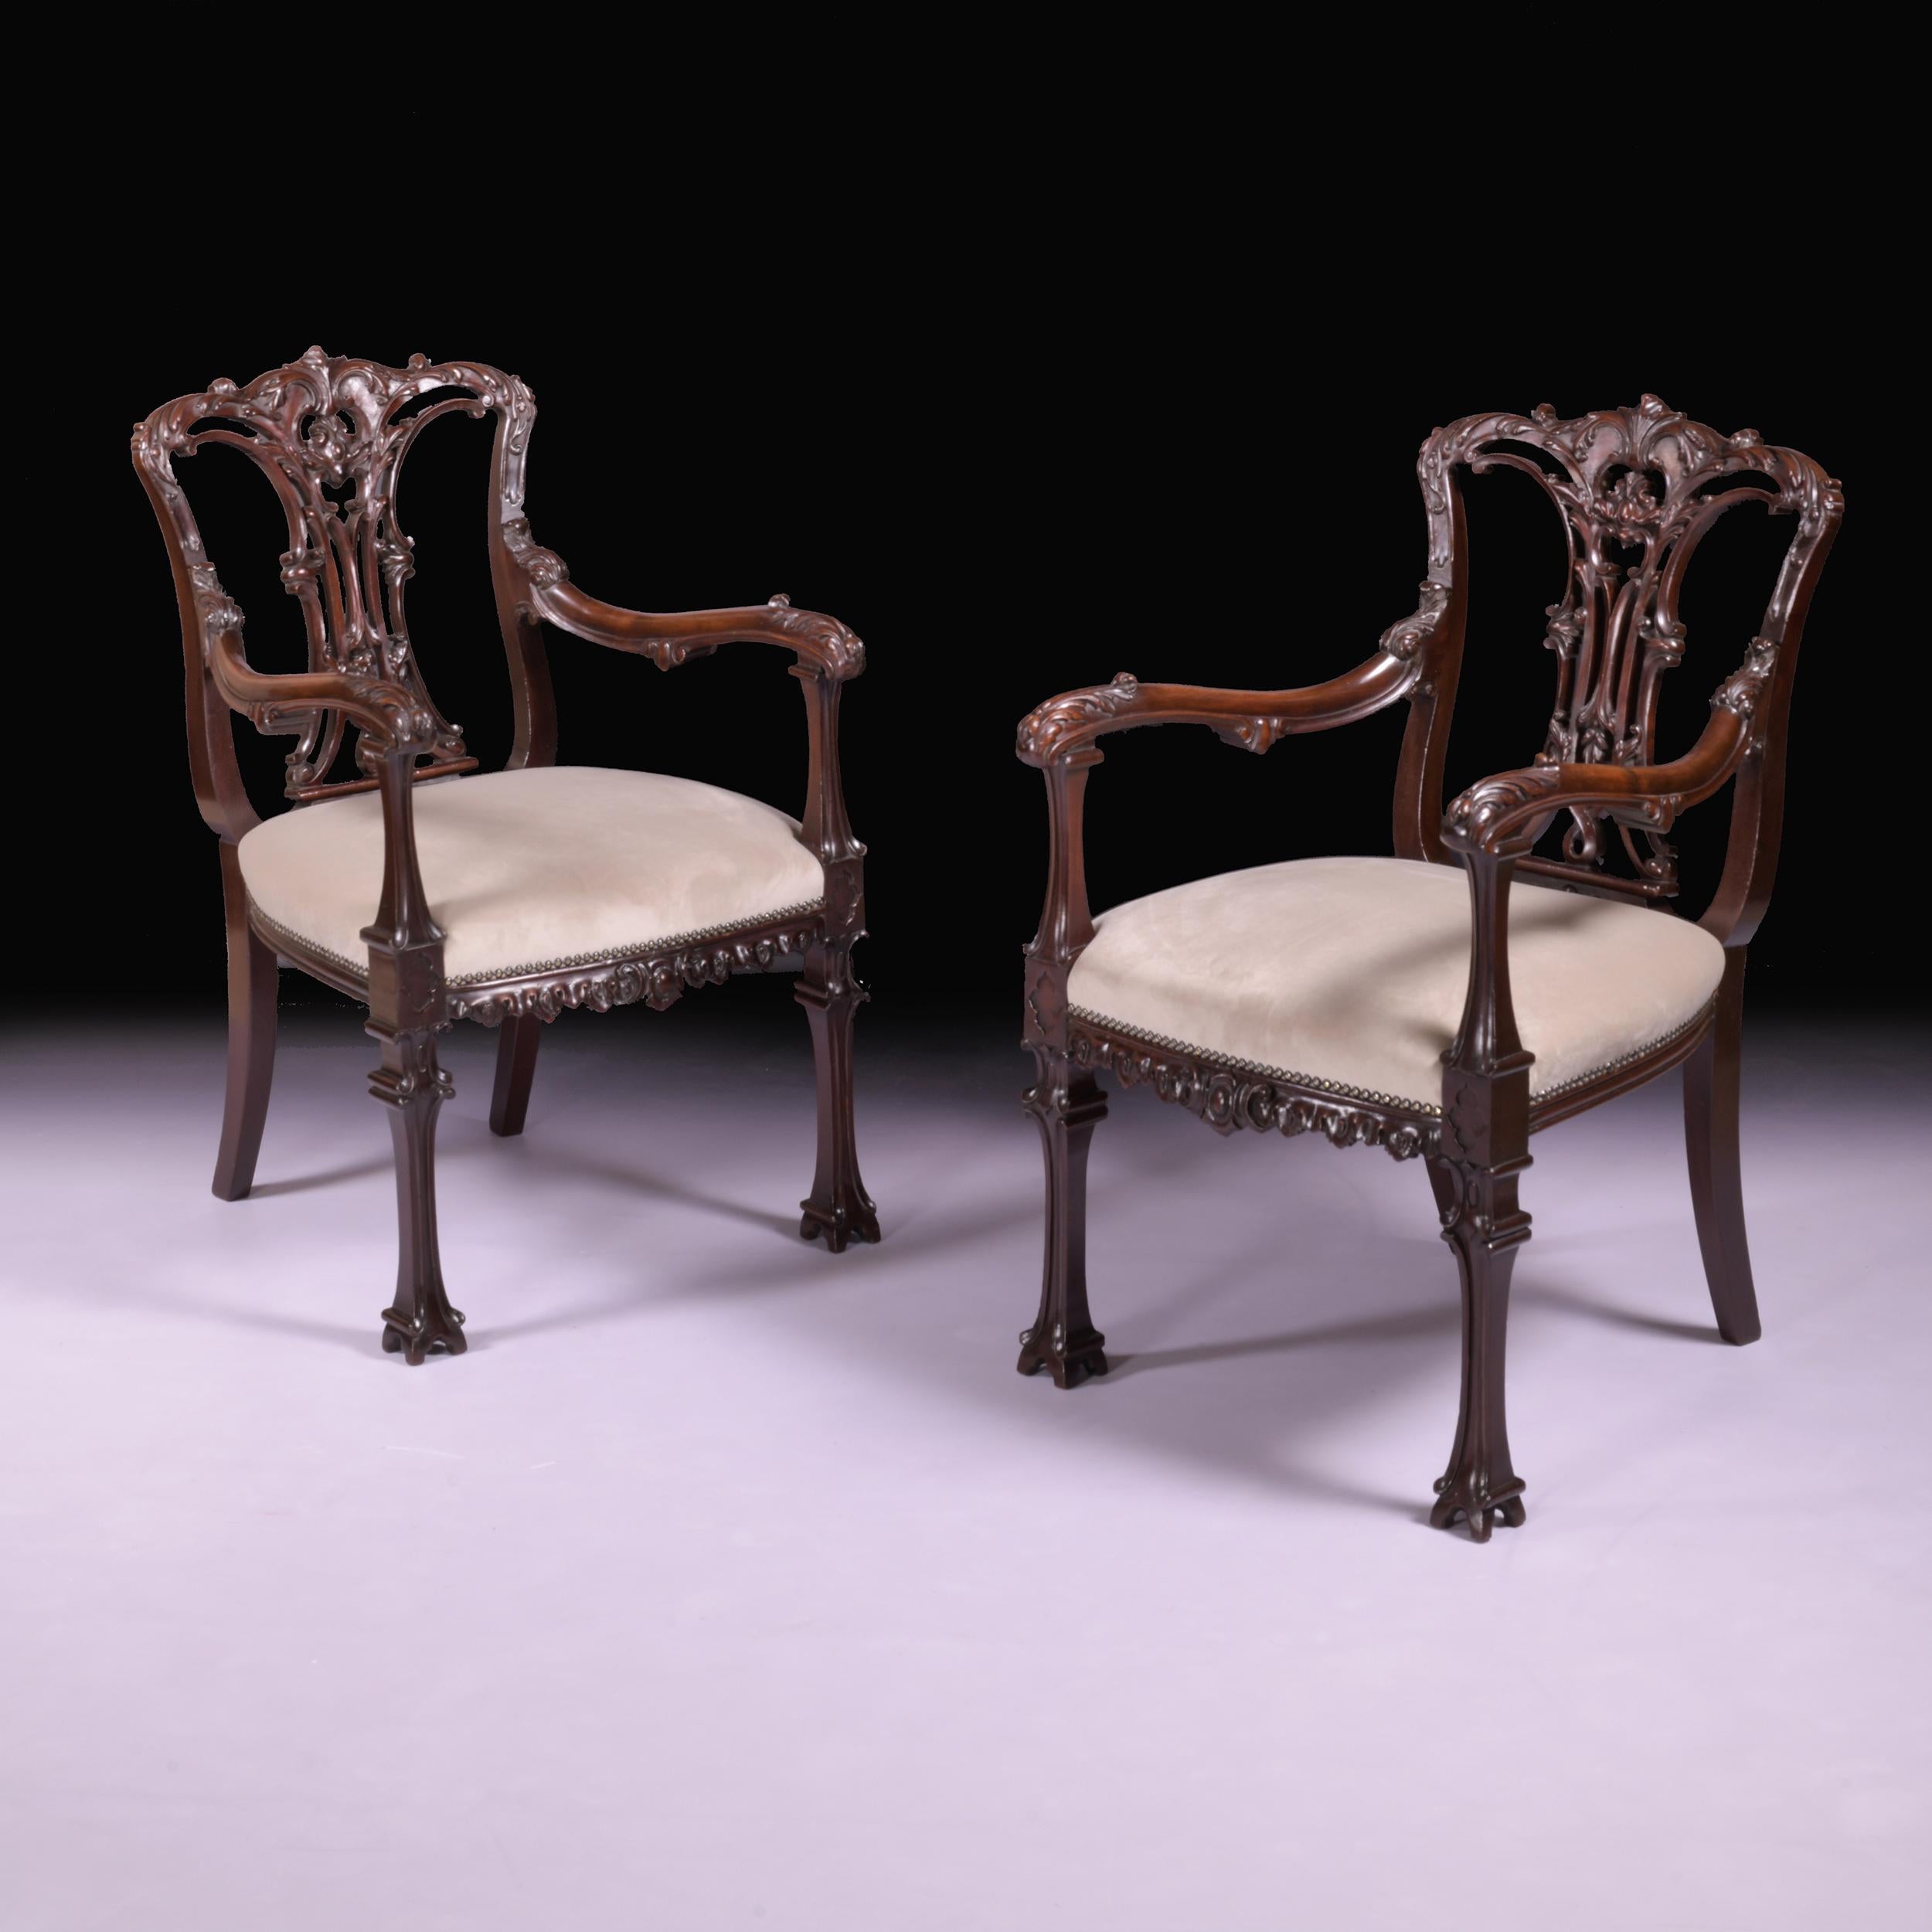 A beautiful pair of 19th century armchairs in the Chinese Chippendale taste, the domed crest above an elaborately carved and interlaced ribbon splat, joined by an upholstered padded seat and scrolling arms, the front legs terminating in 'Chinese'